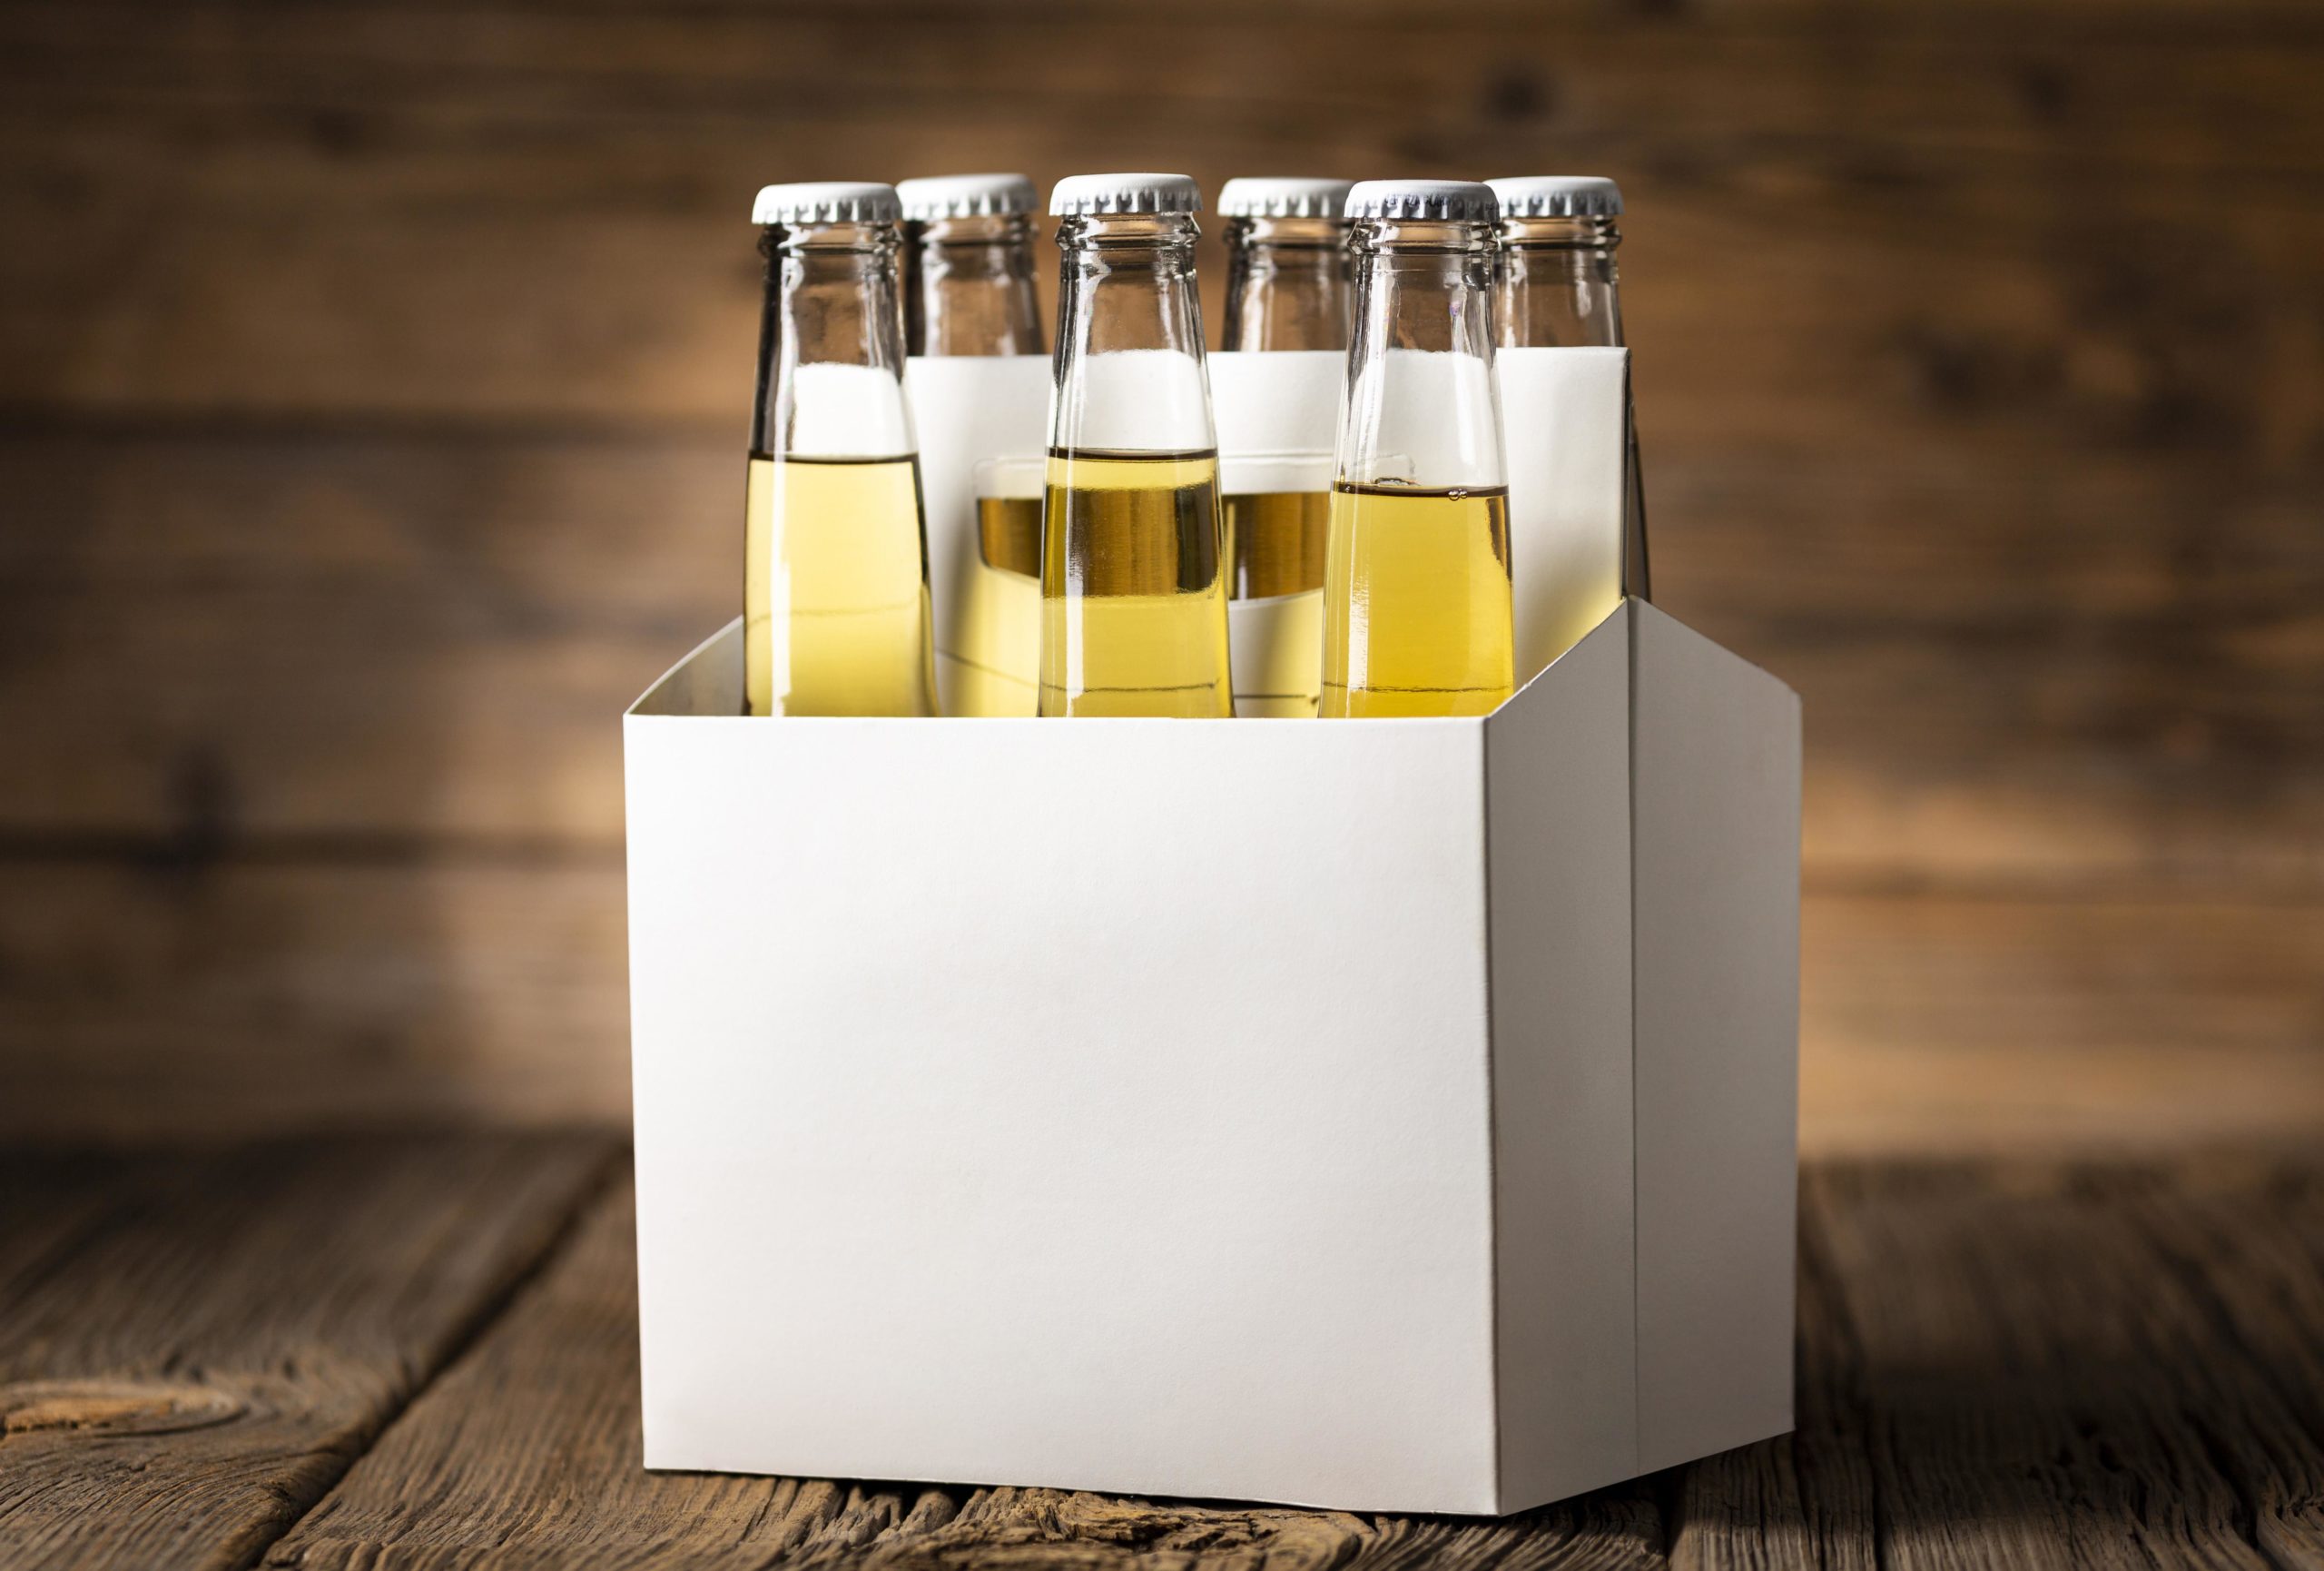 Close-up of beer bottles in box on table